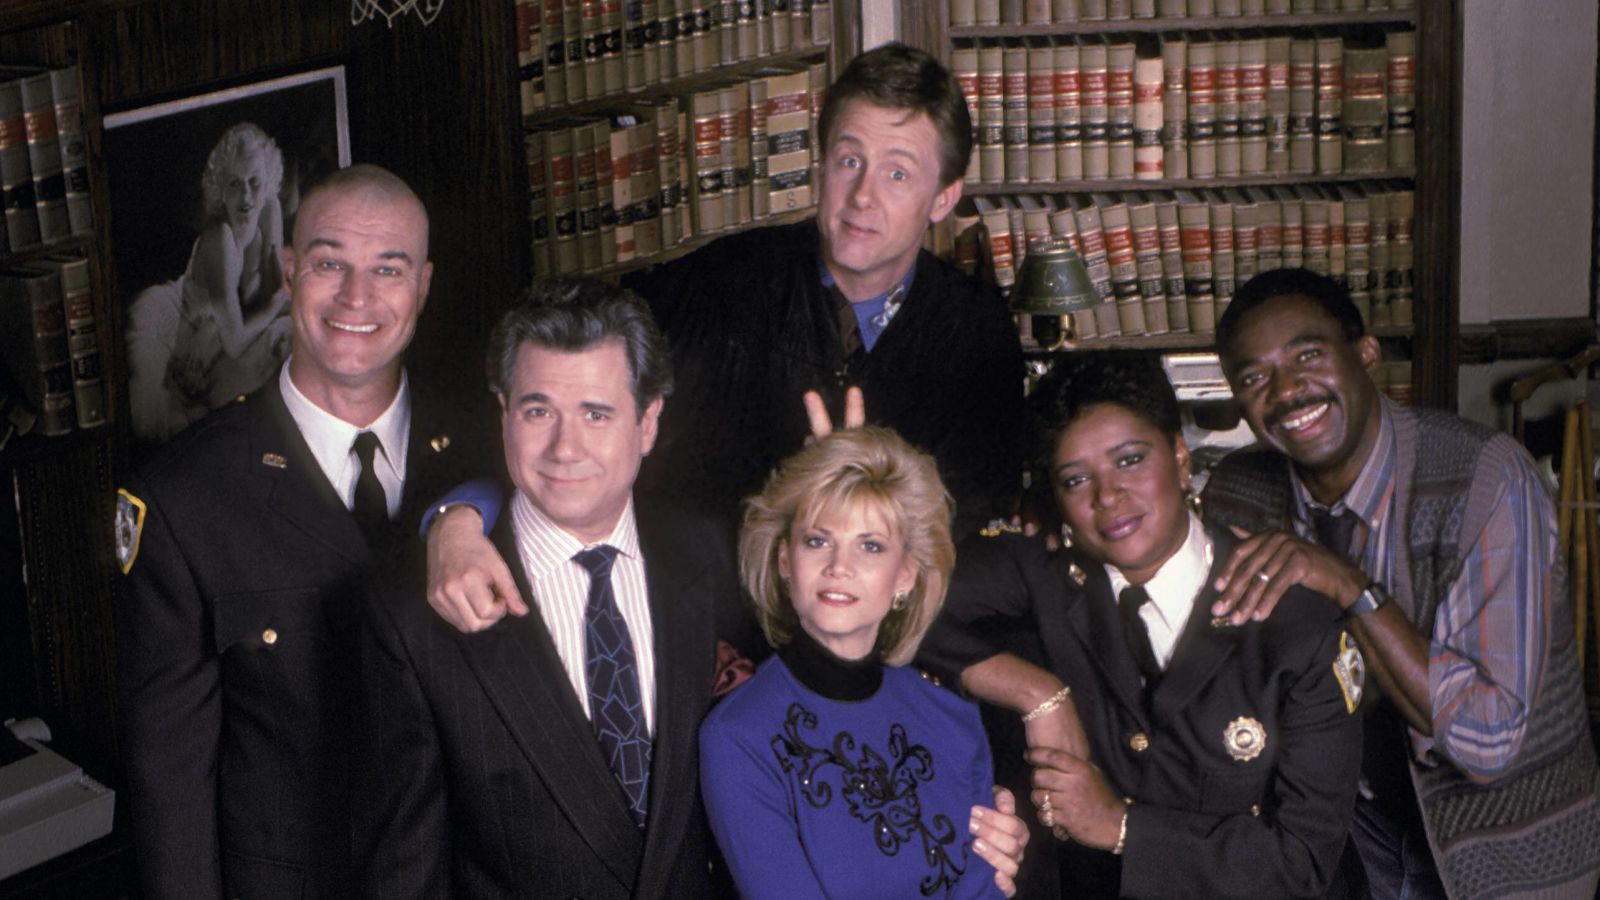 Through The Years With The Cast Of Night Court.